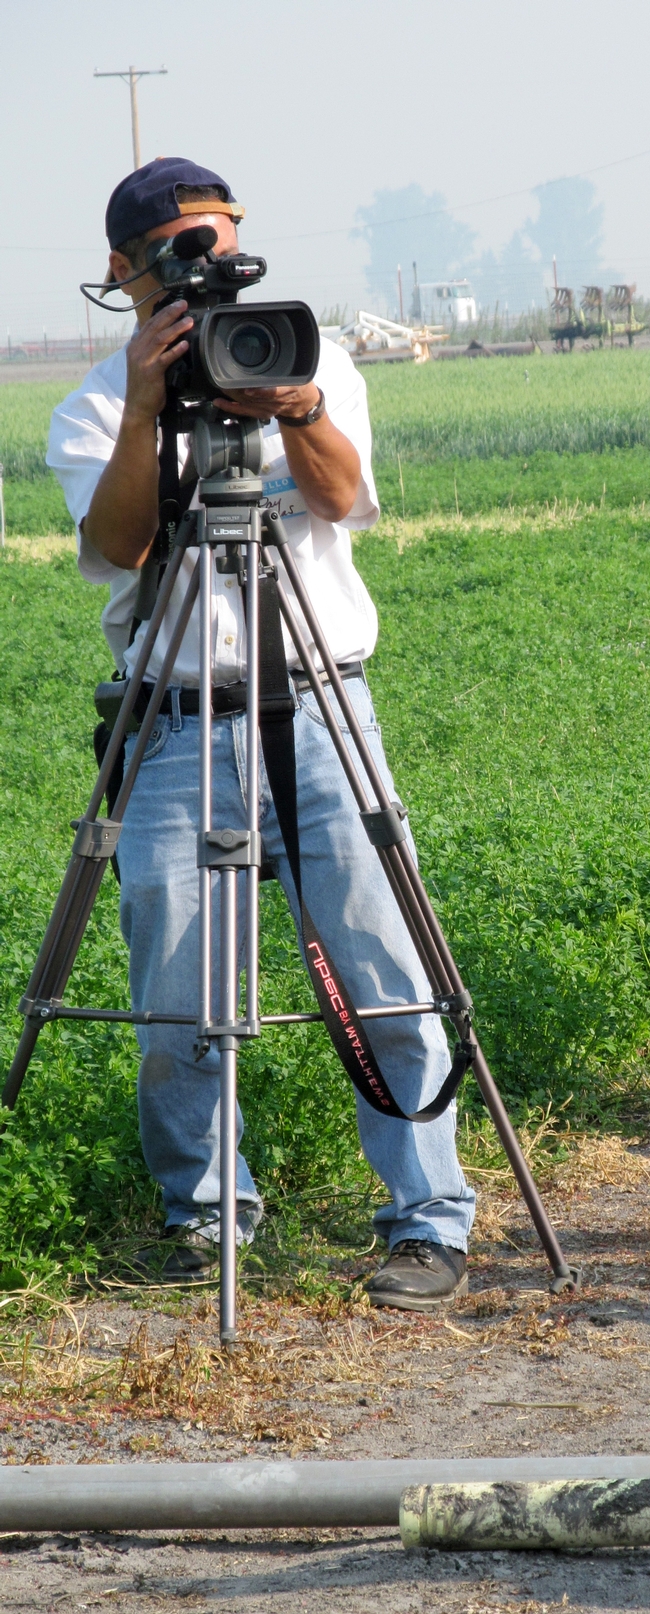 ANR photographer at 2013 IREC Field Day